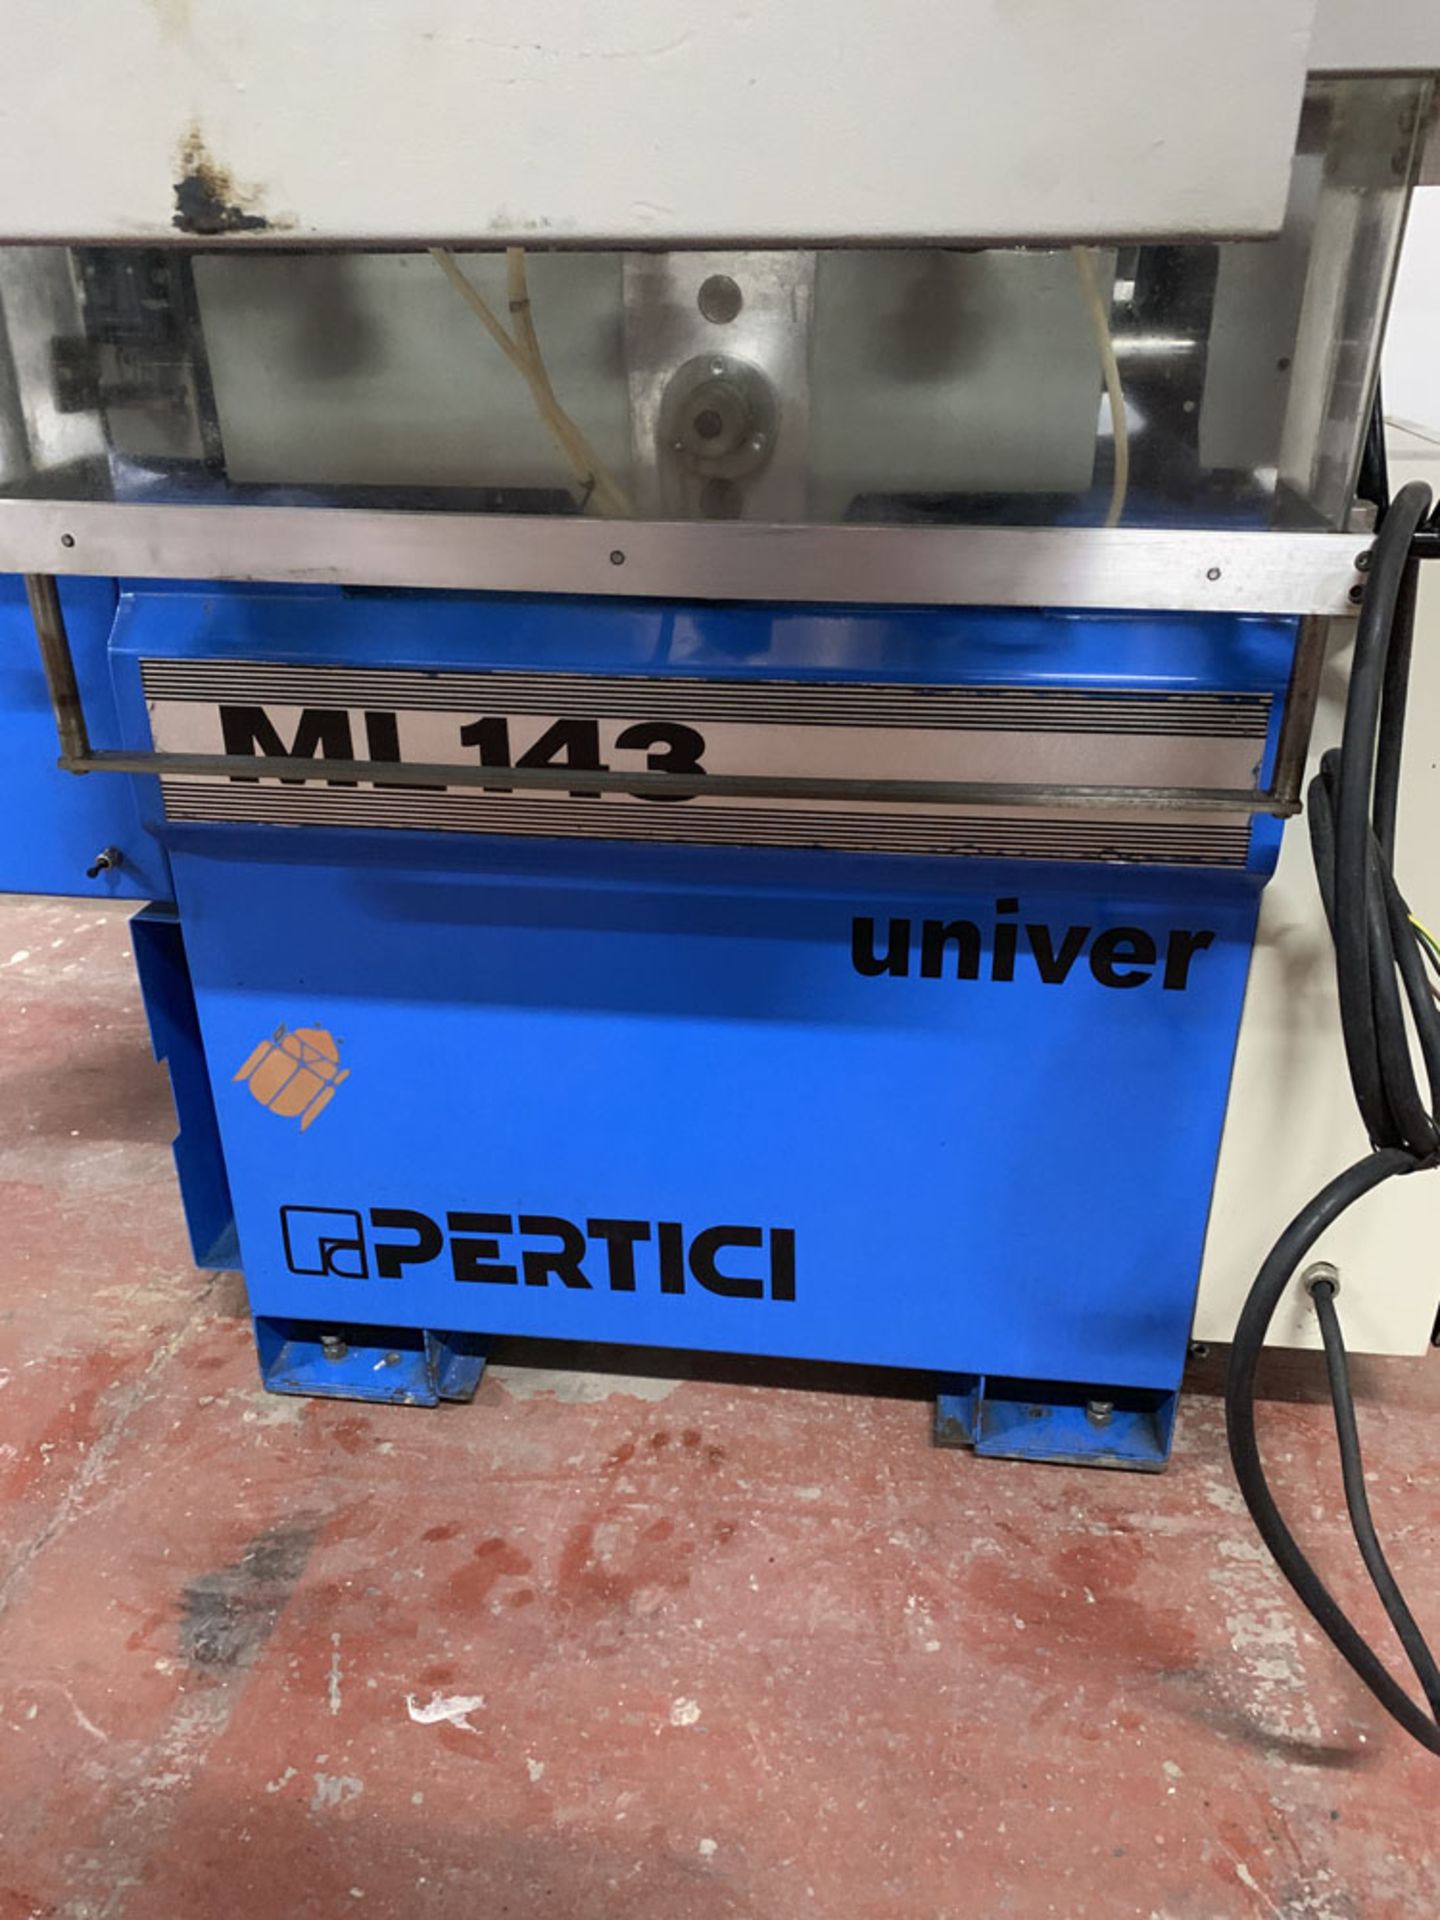 Pertici Univer Model ML143 Water Slot Router. - Image 3 of 10